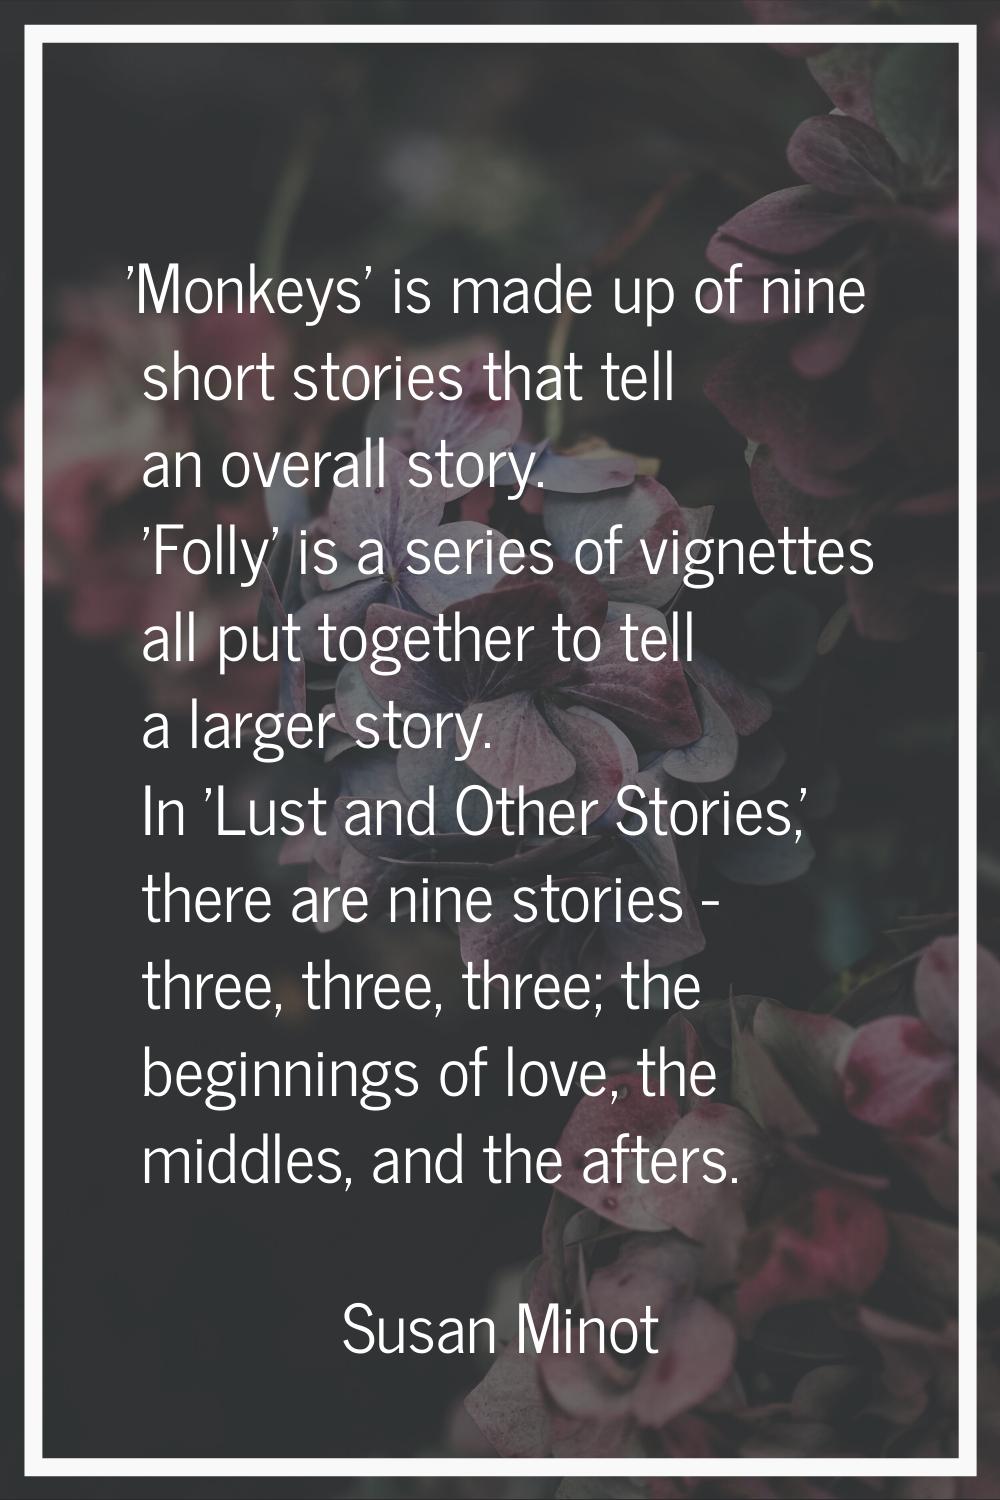 'Monkeys' is made up of nine short stories that tell an overall story. 'Folly' is a series of vigne